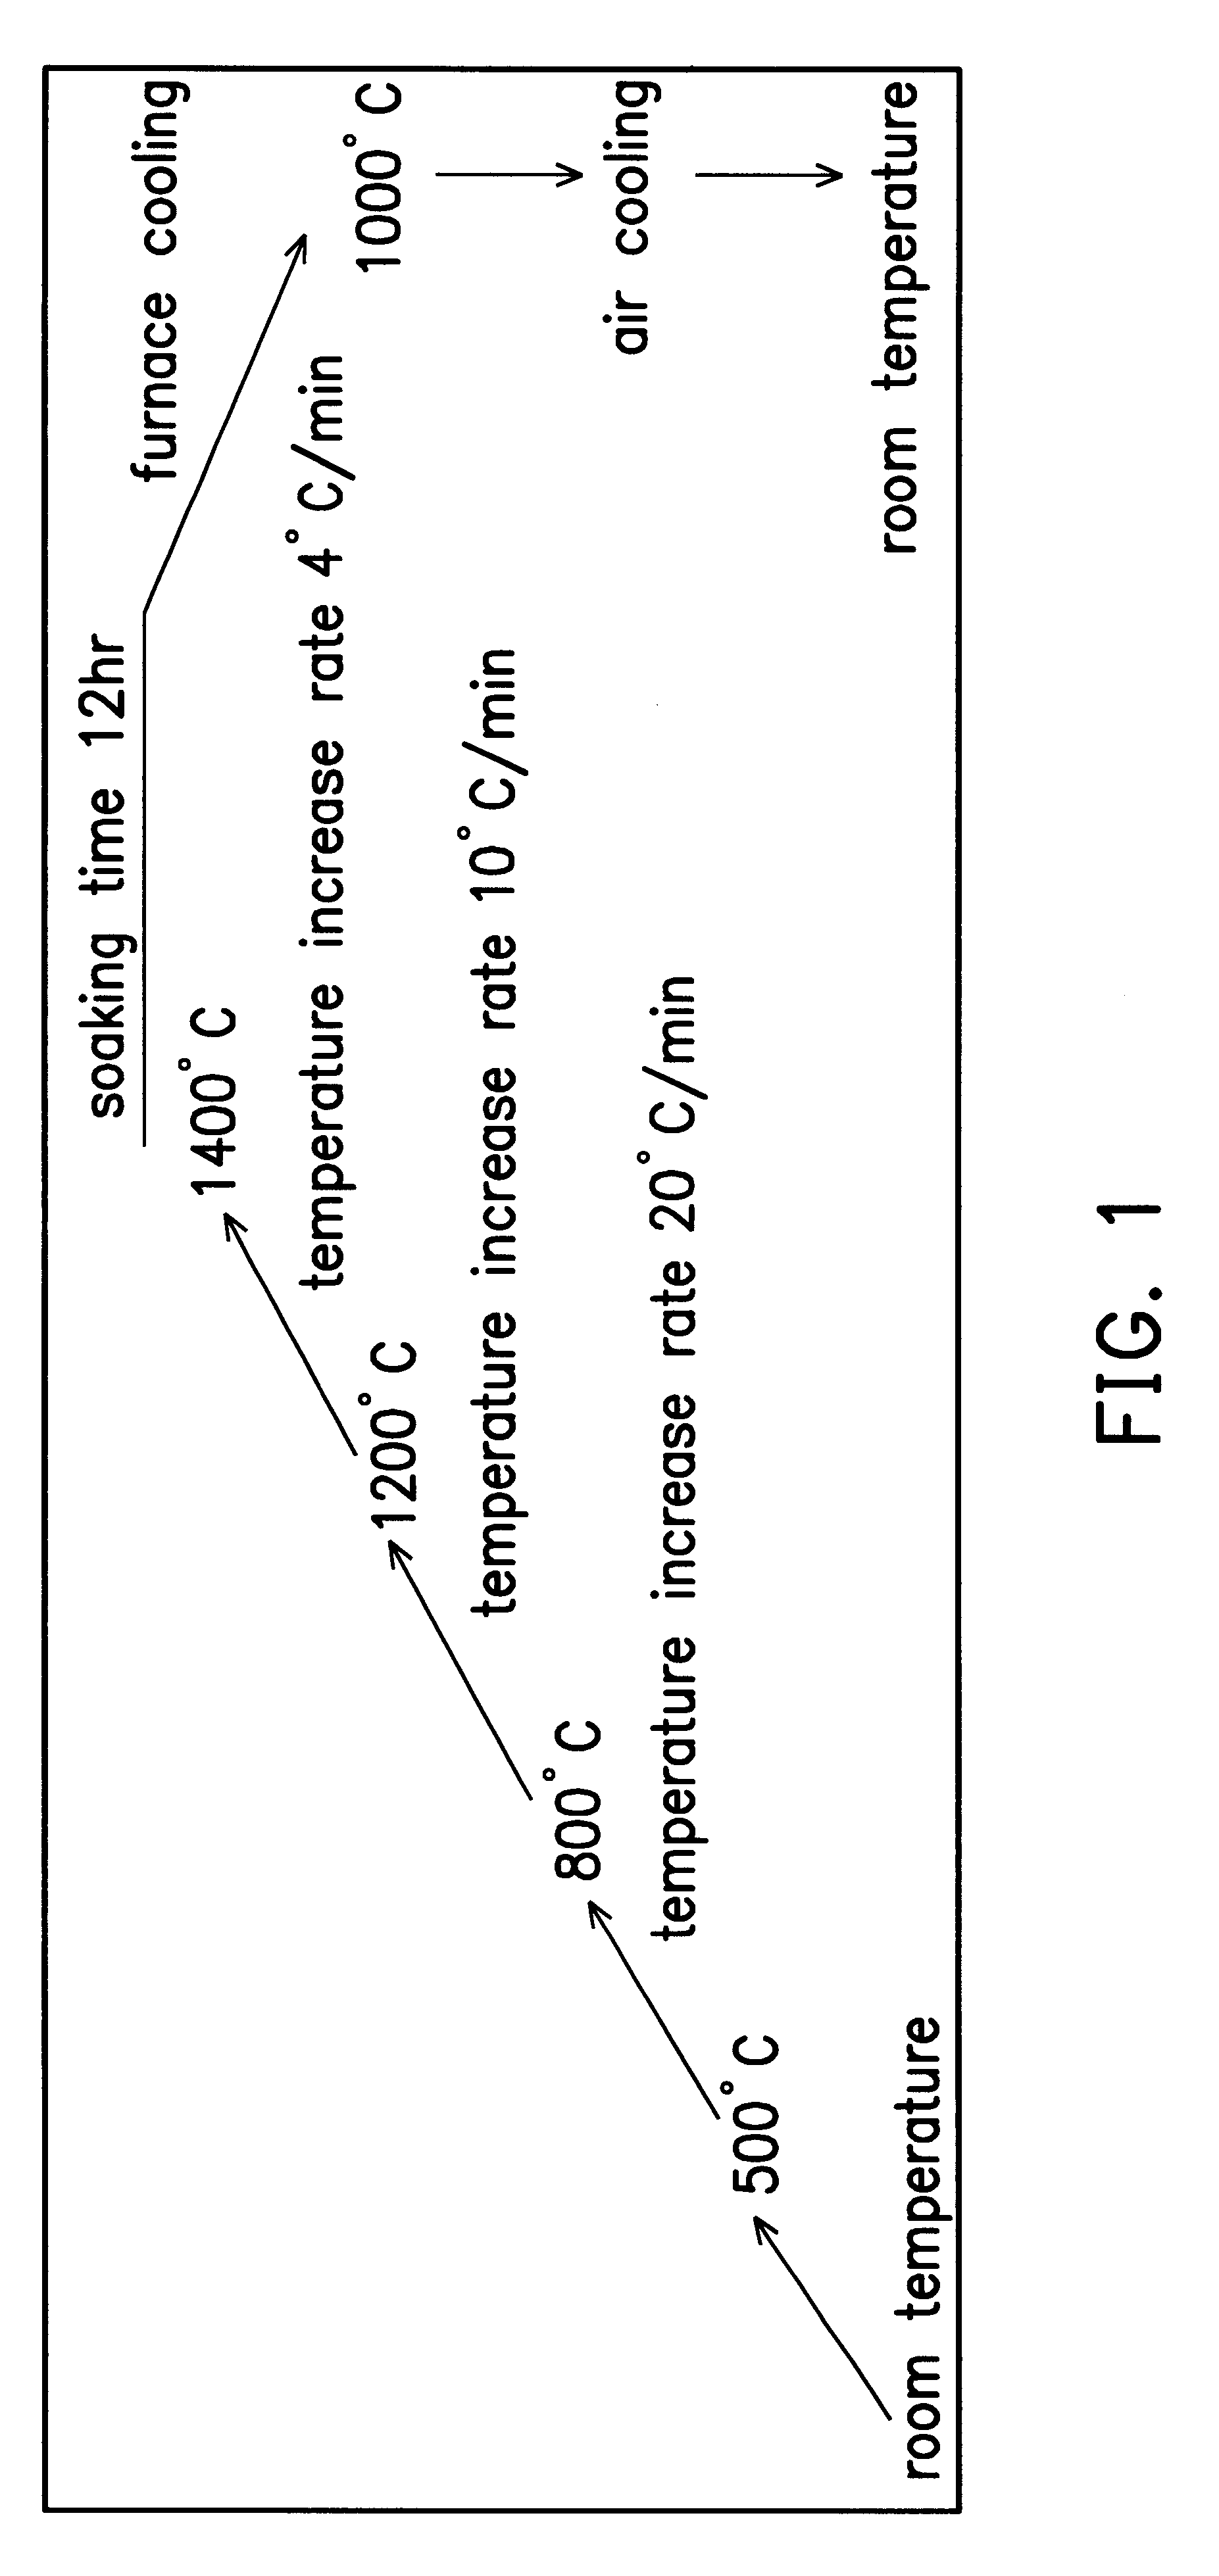 Process for producing fast-setting, bioresorbable calcium phosphate cements